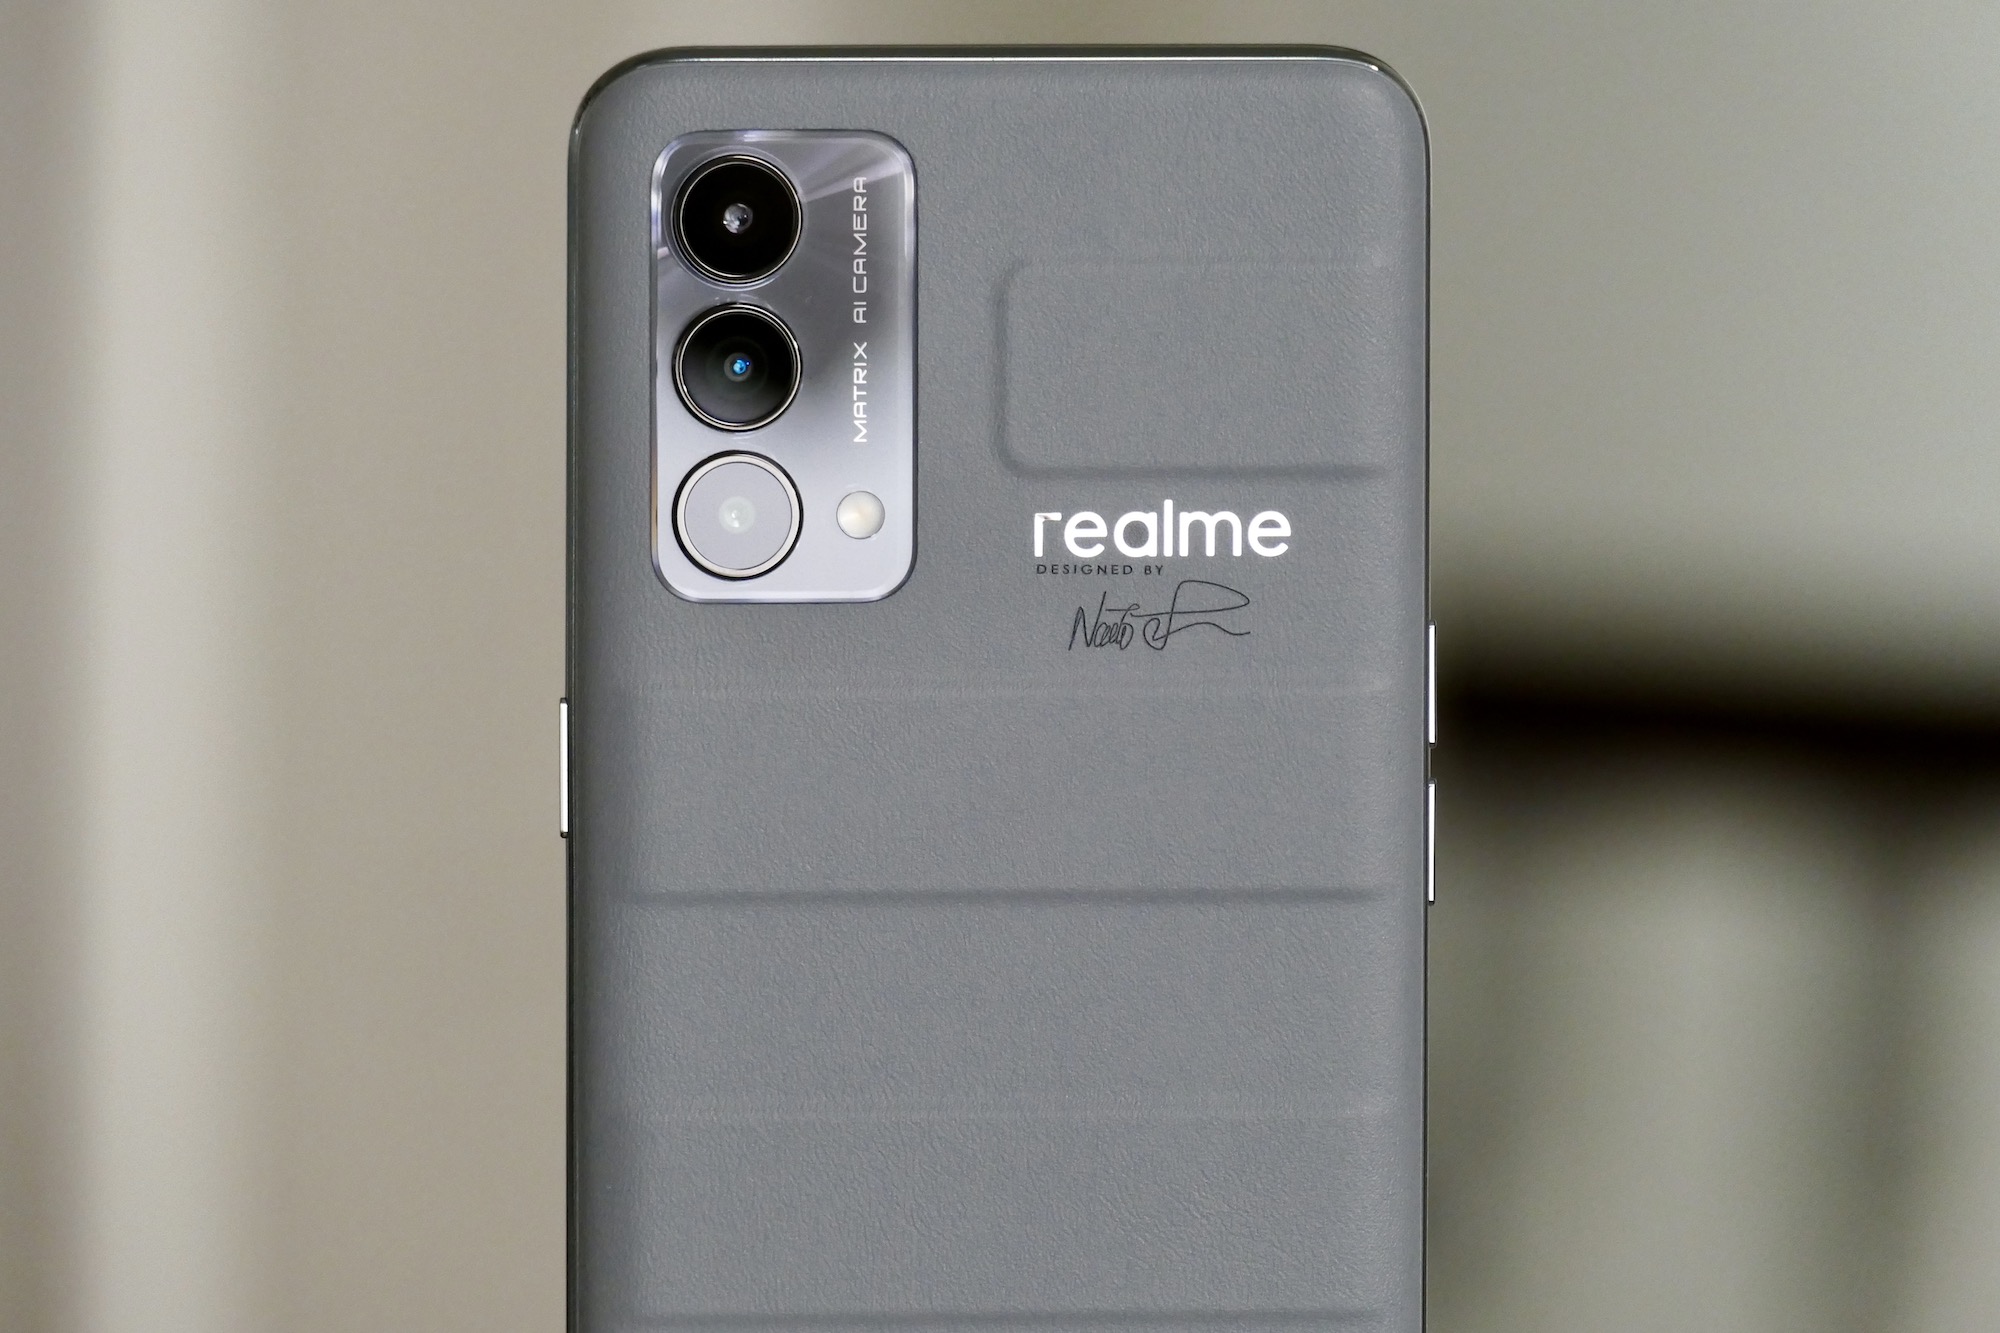 USED SET)REALME GT MASTER EDITION 5G CONDITION 100% PERFECT NO ANY ISSUE,  Mobile Phones & Gadgets, Mobile Phones, Android Phones, Realme on Carousell